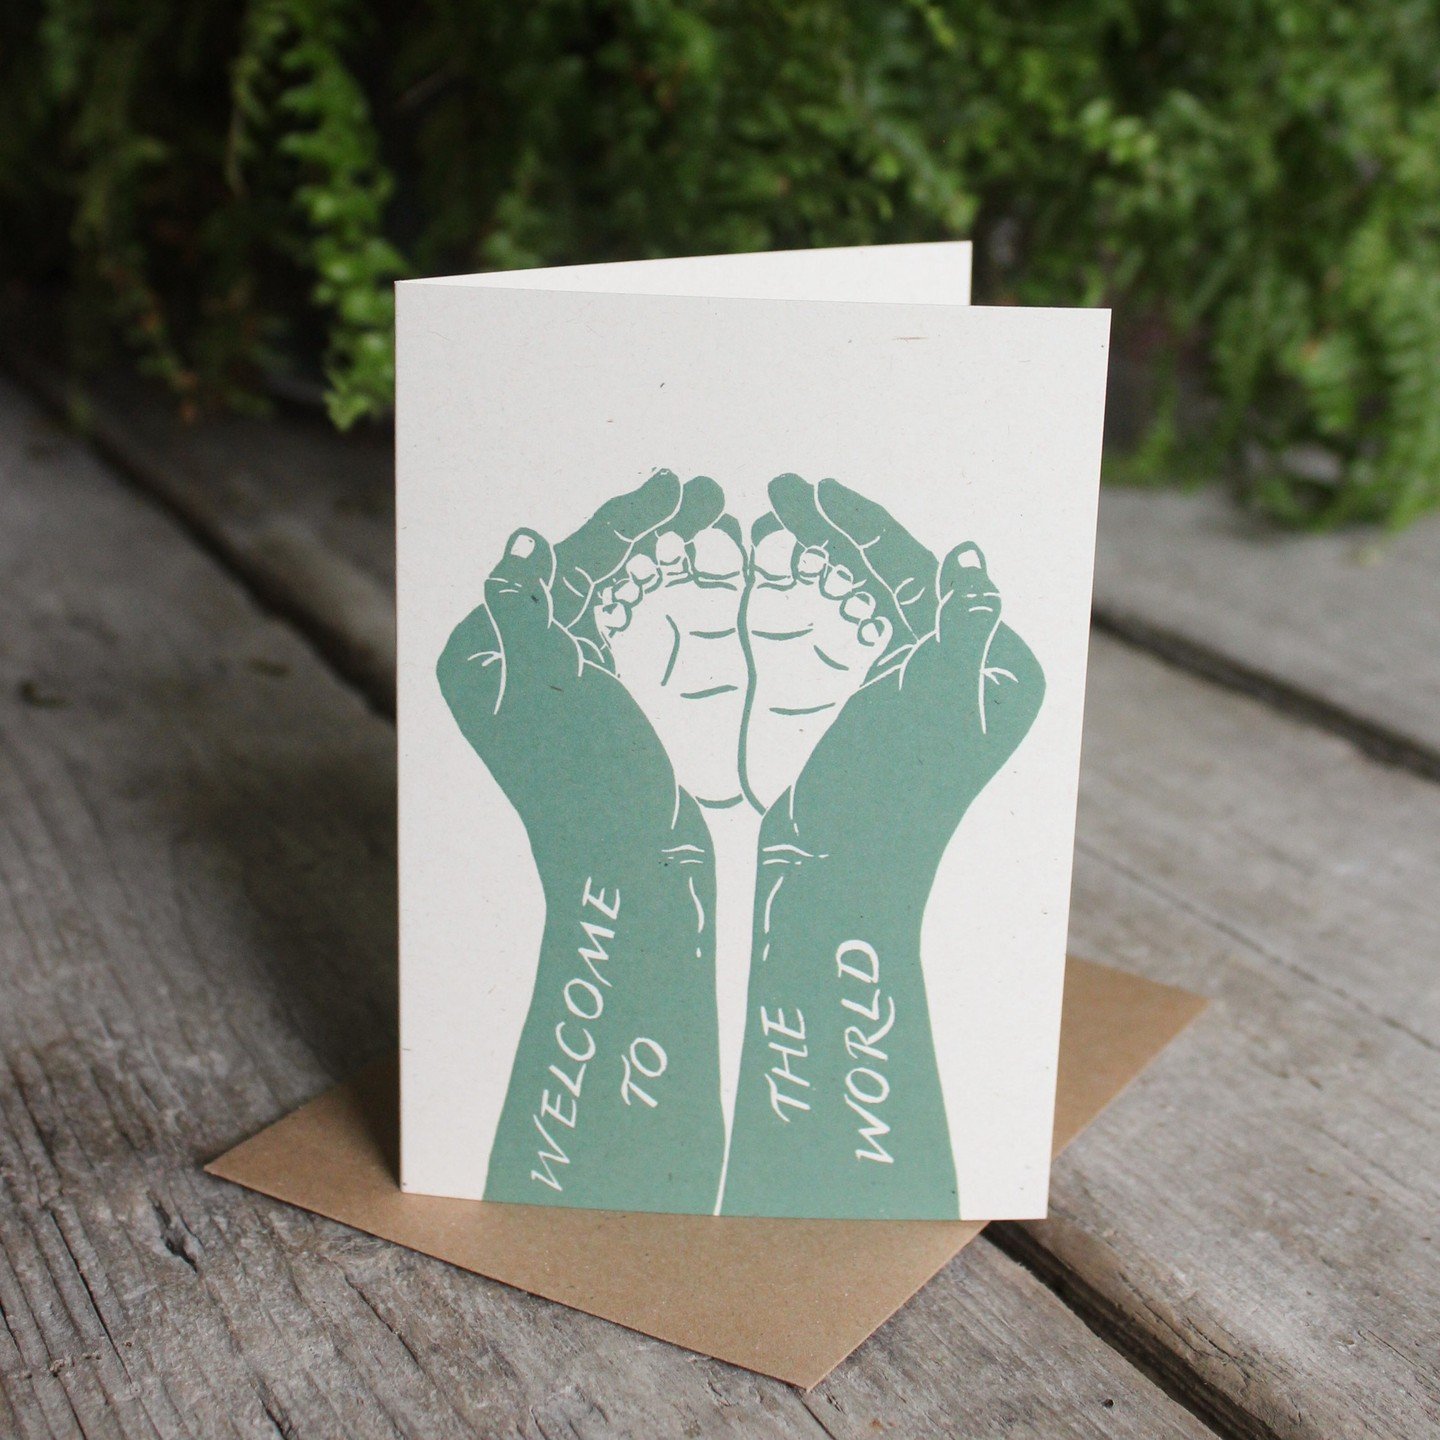 Welcome to the world - This new born baby card is now up on my Etsy shop, in case you are looking for a sustainable gift card for new parents. 
.
.
.
.
#printmaker #linocutprint #linocut #linocutting #linocarving #printmakersofinstagram #irishhandmad